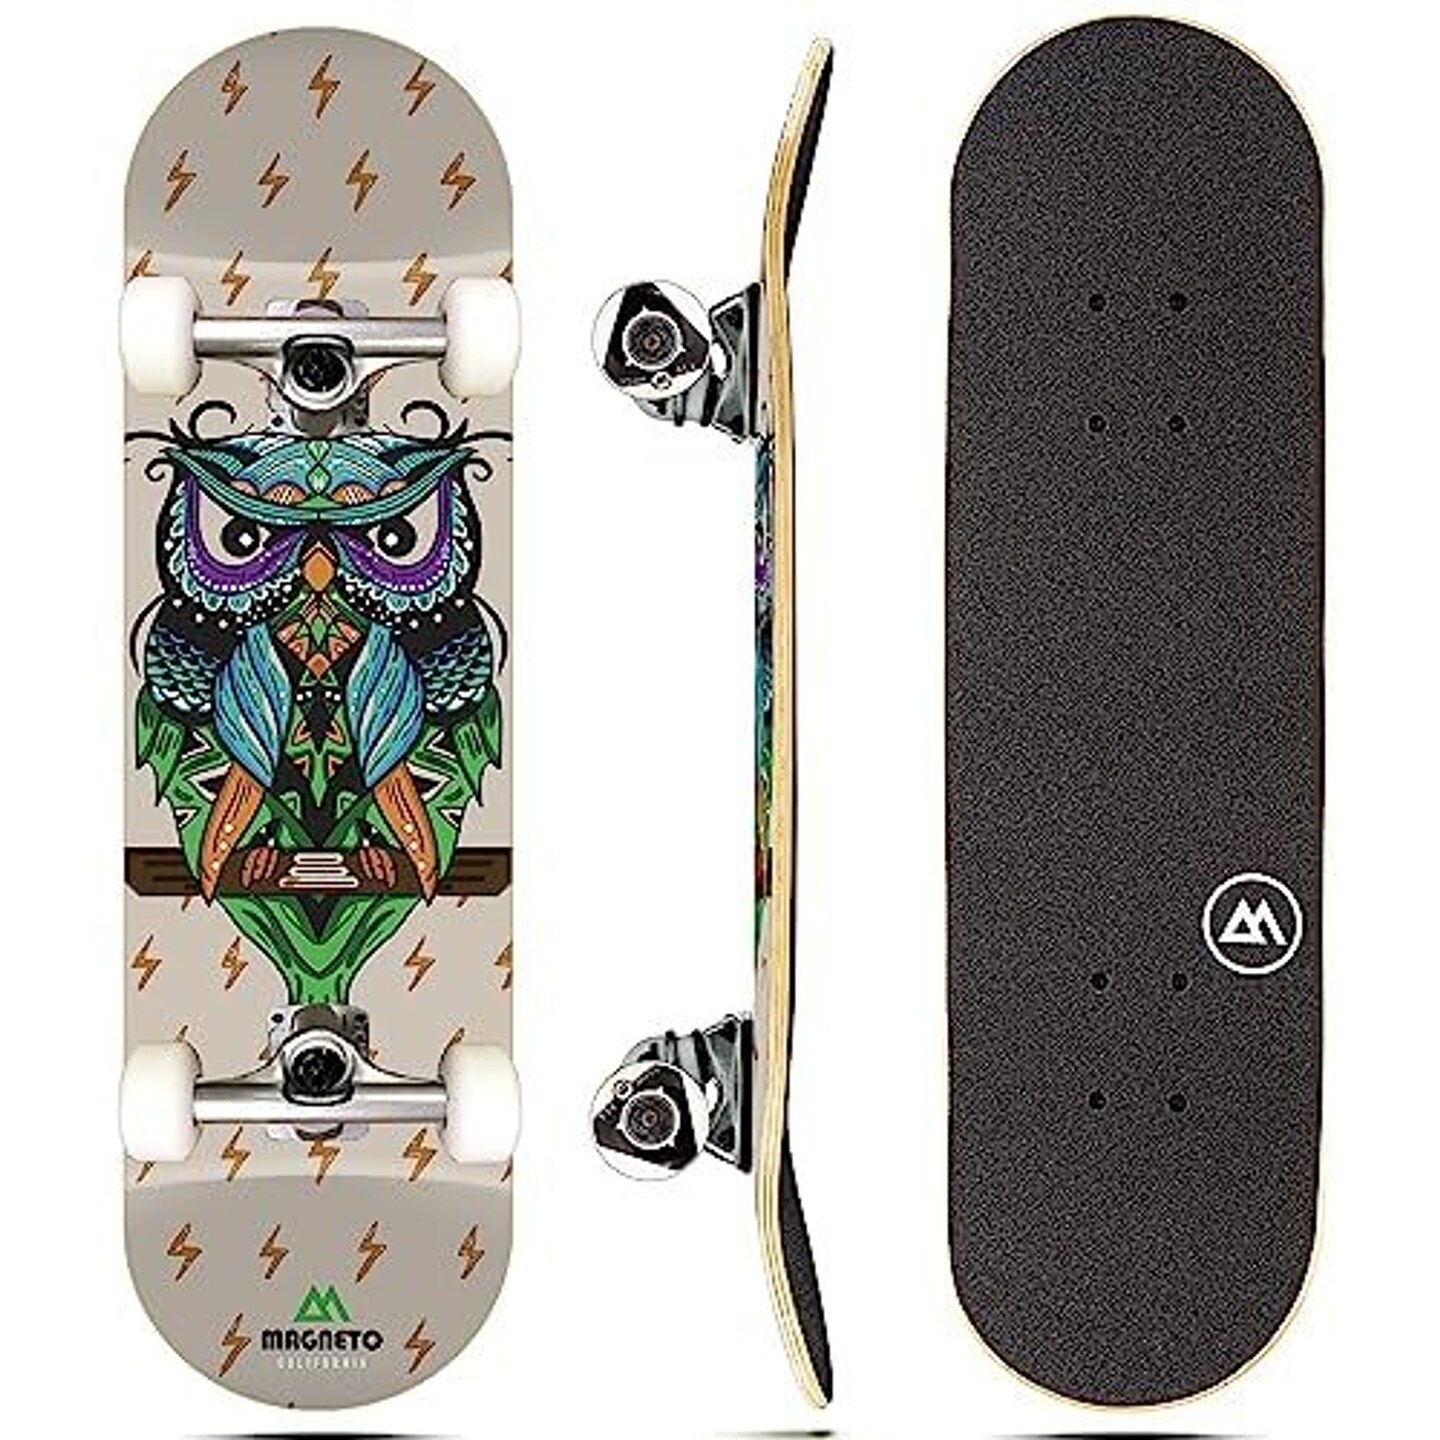 Magneto Complete Skateboard | Maple Wood | ABEC 5 Bearings | Double Kick Concave Deck |Skateboard Cruiser Skateboard | Skateboards for Beginners, Teens &#x26; Adults (Free Stickers Included)